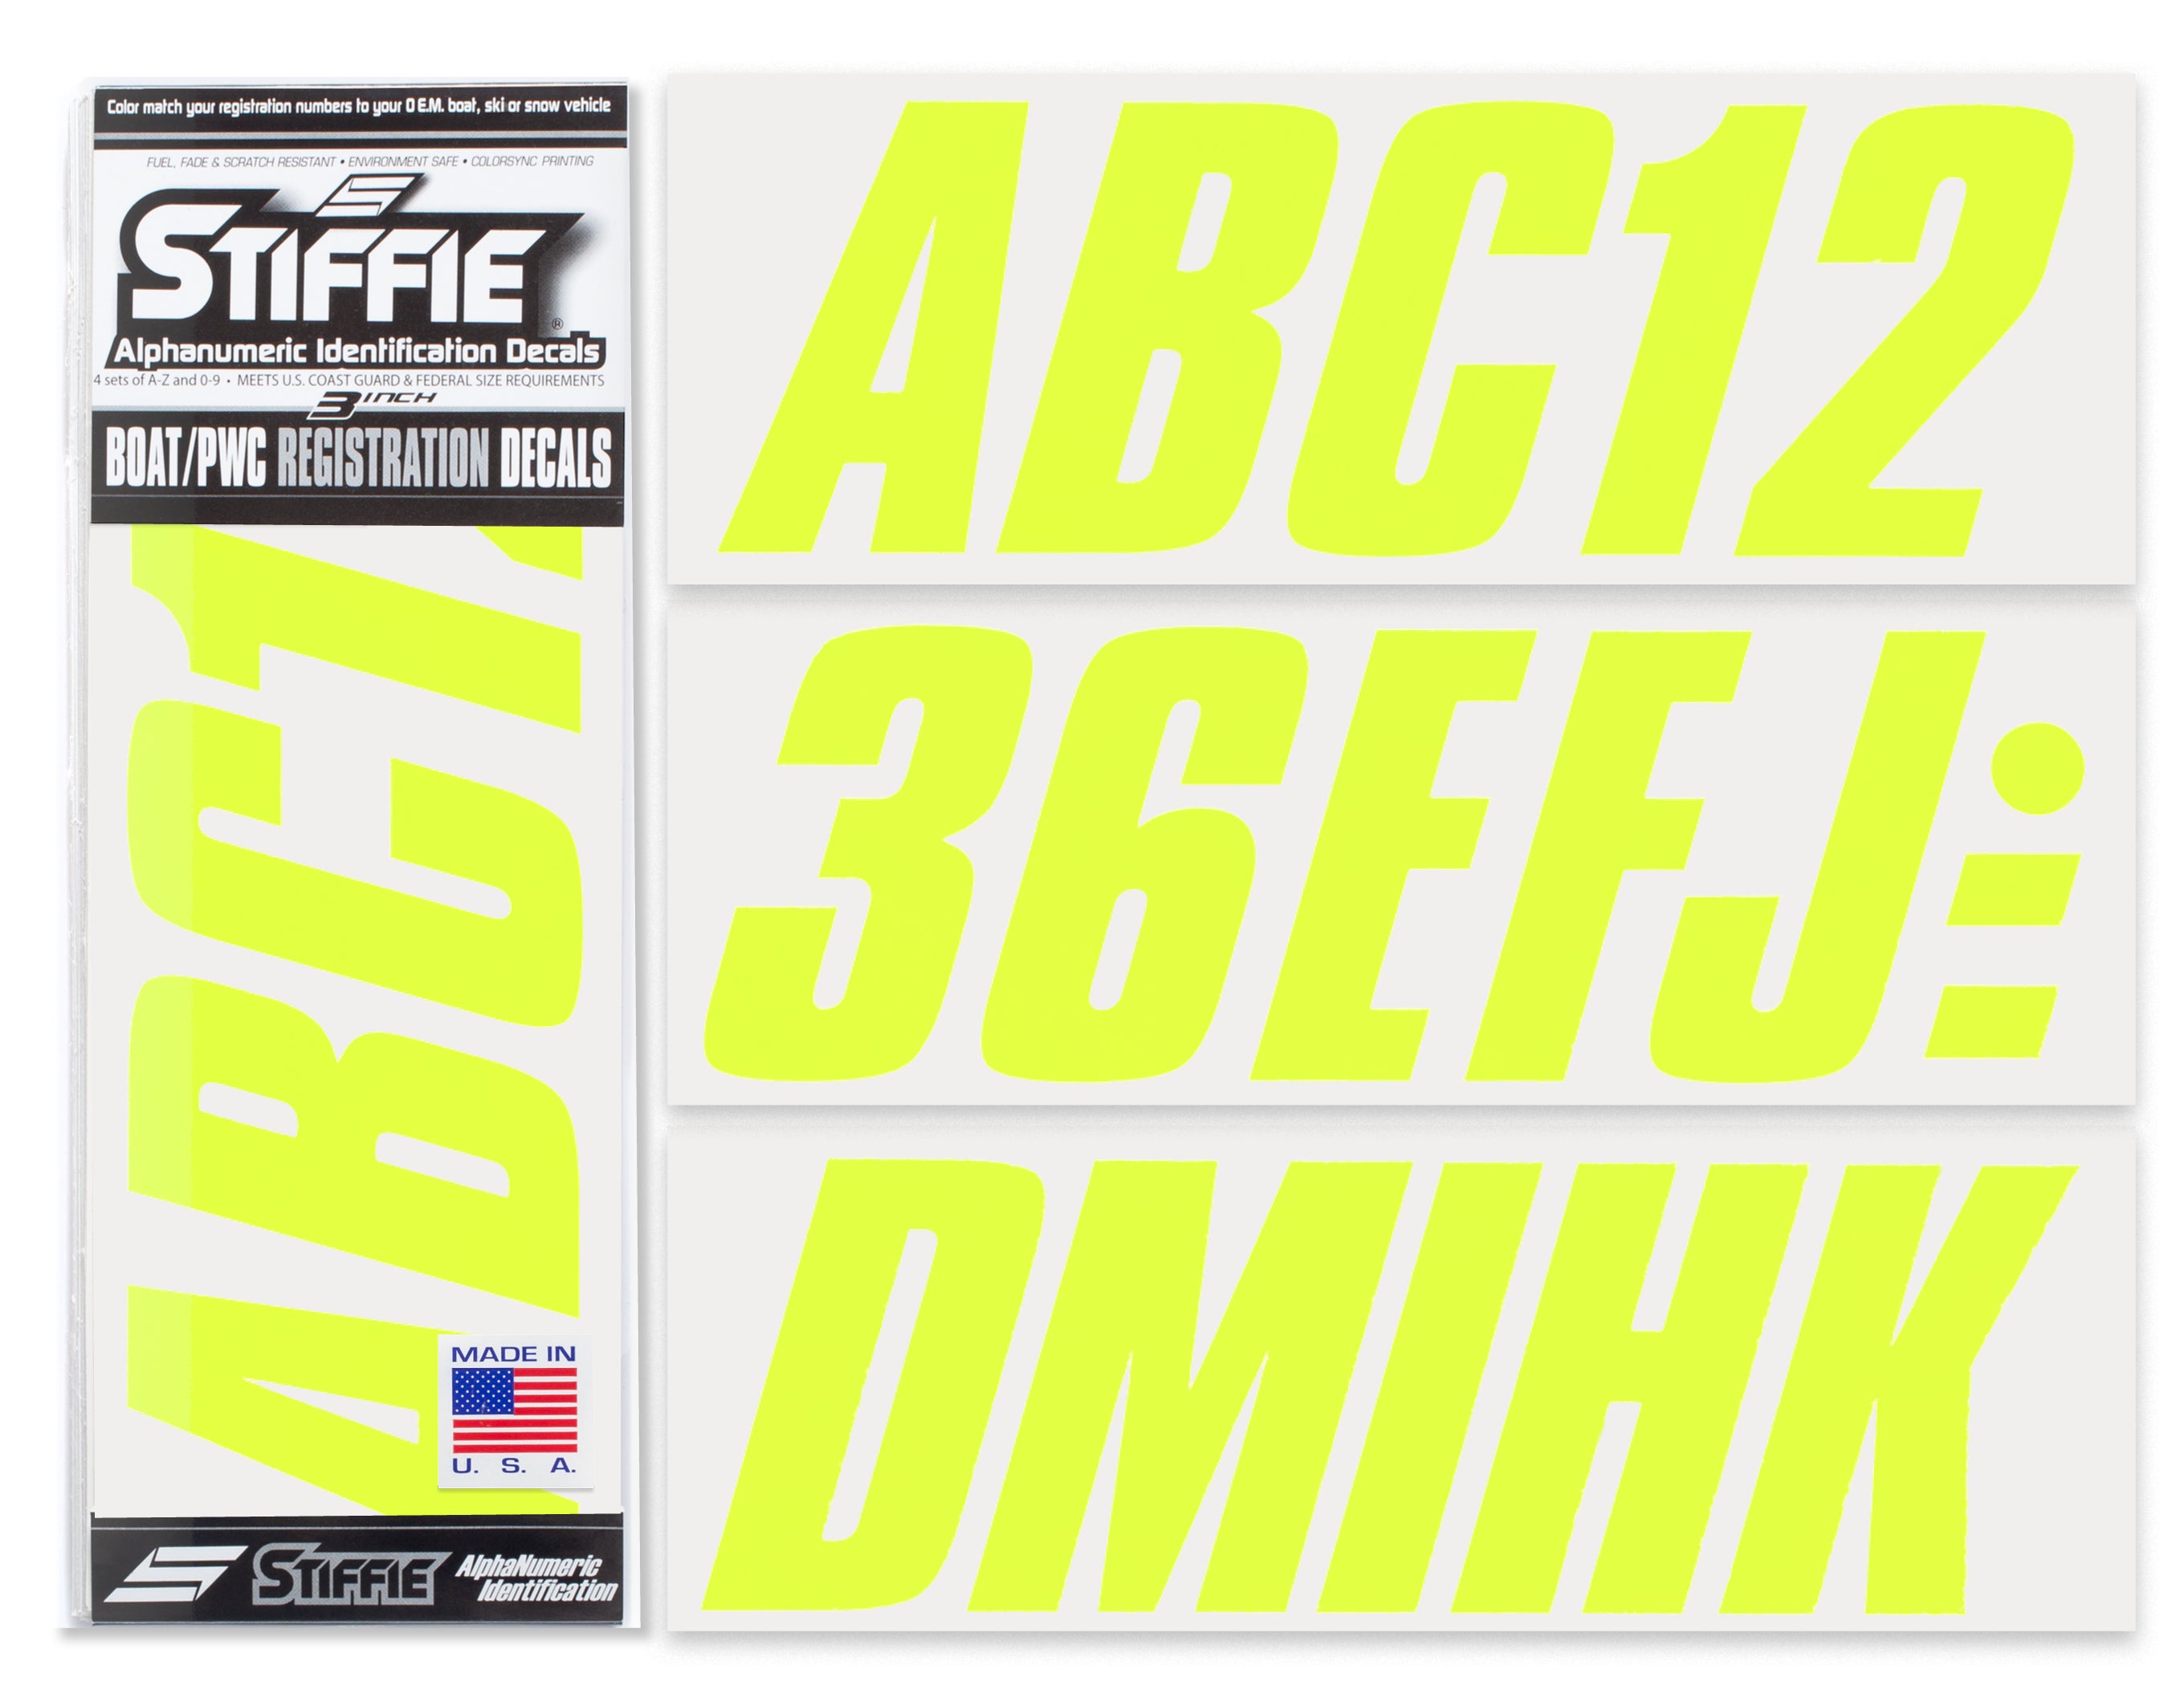 STIFFIE Shift Day Glow Yellow 3" ID Kit Alpha-Numeric Registration Identification Numbers Stickers Decals for Boats & Personal Watercraft